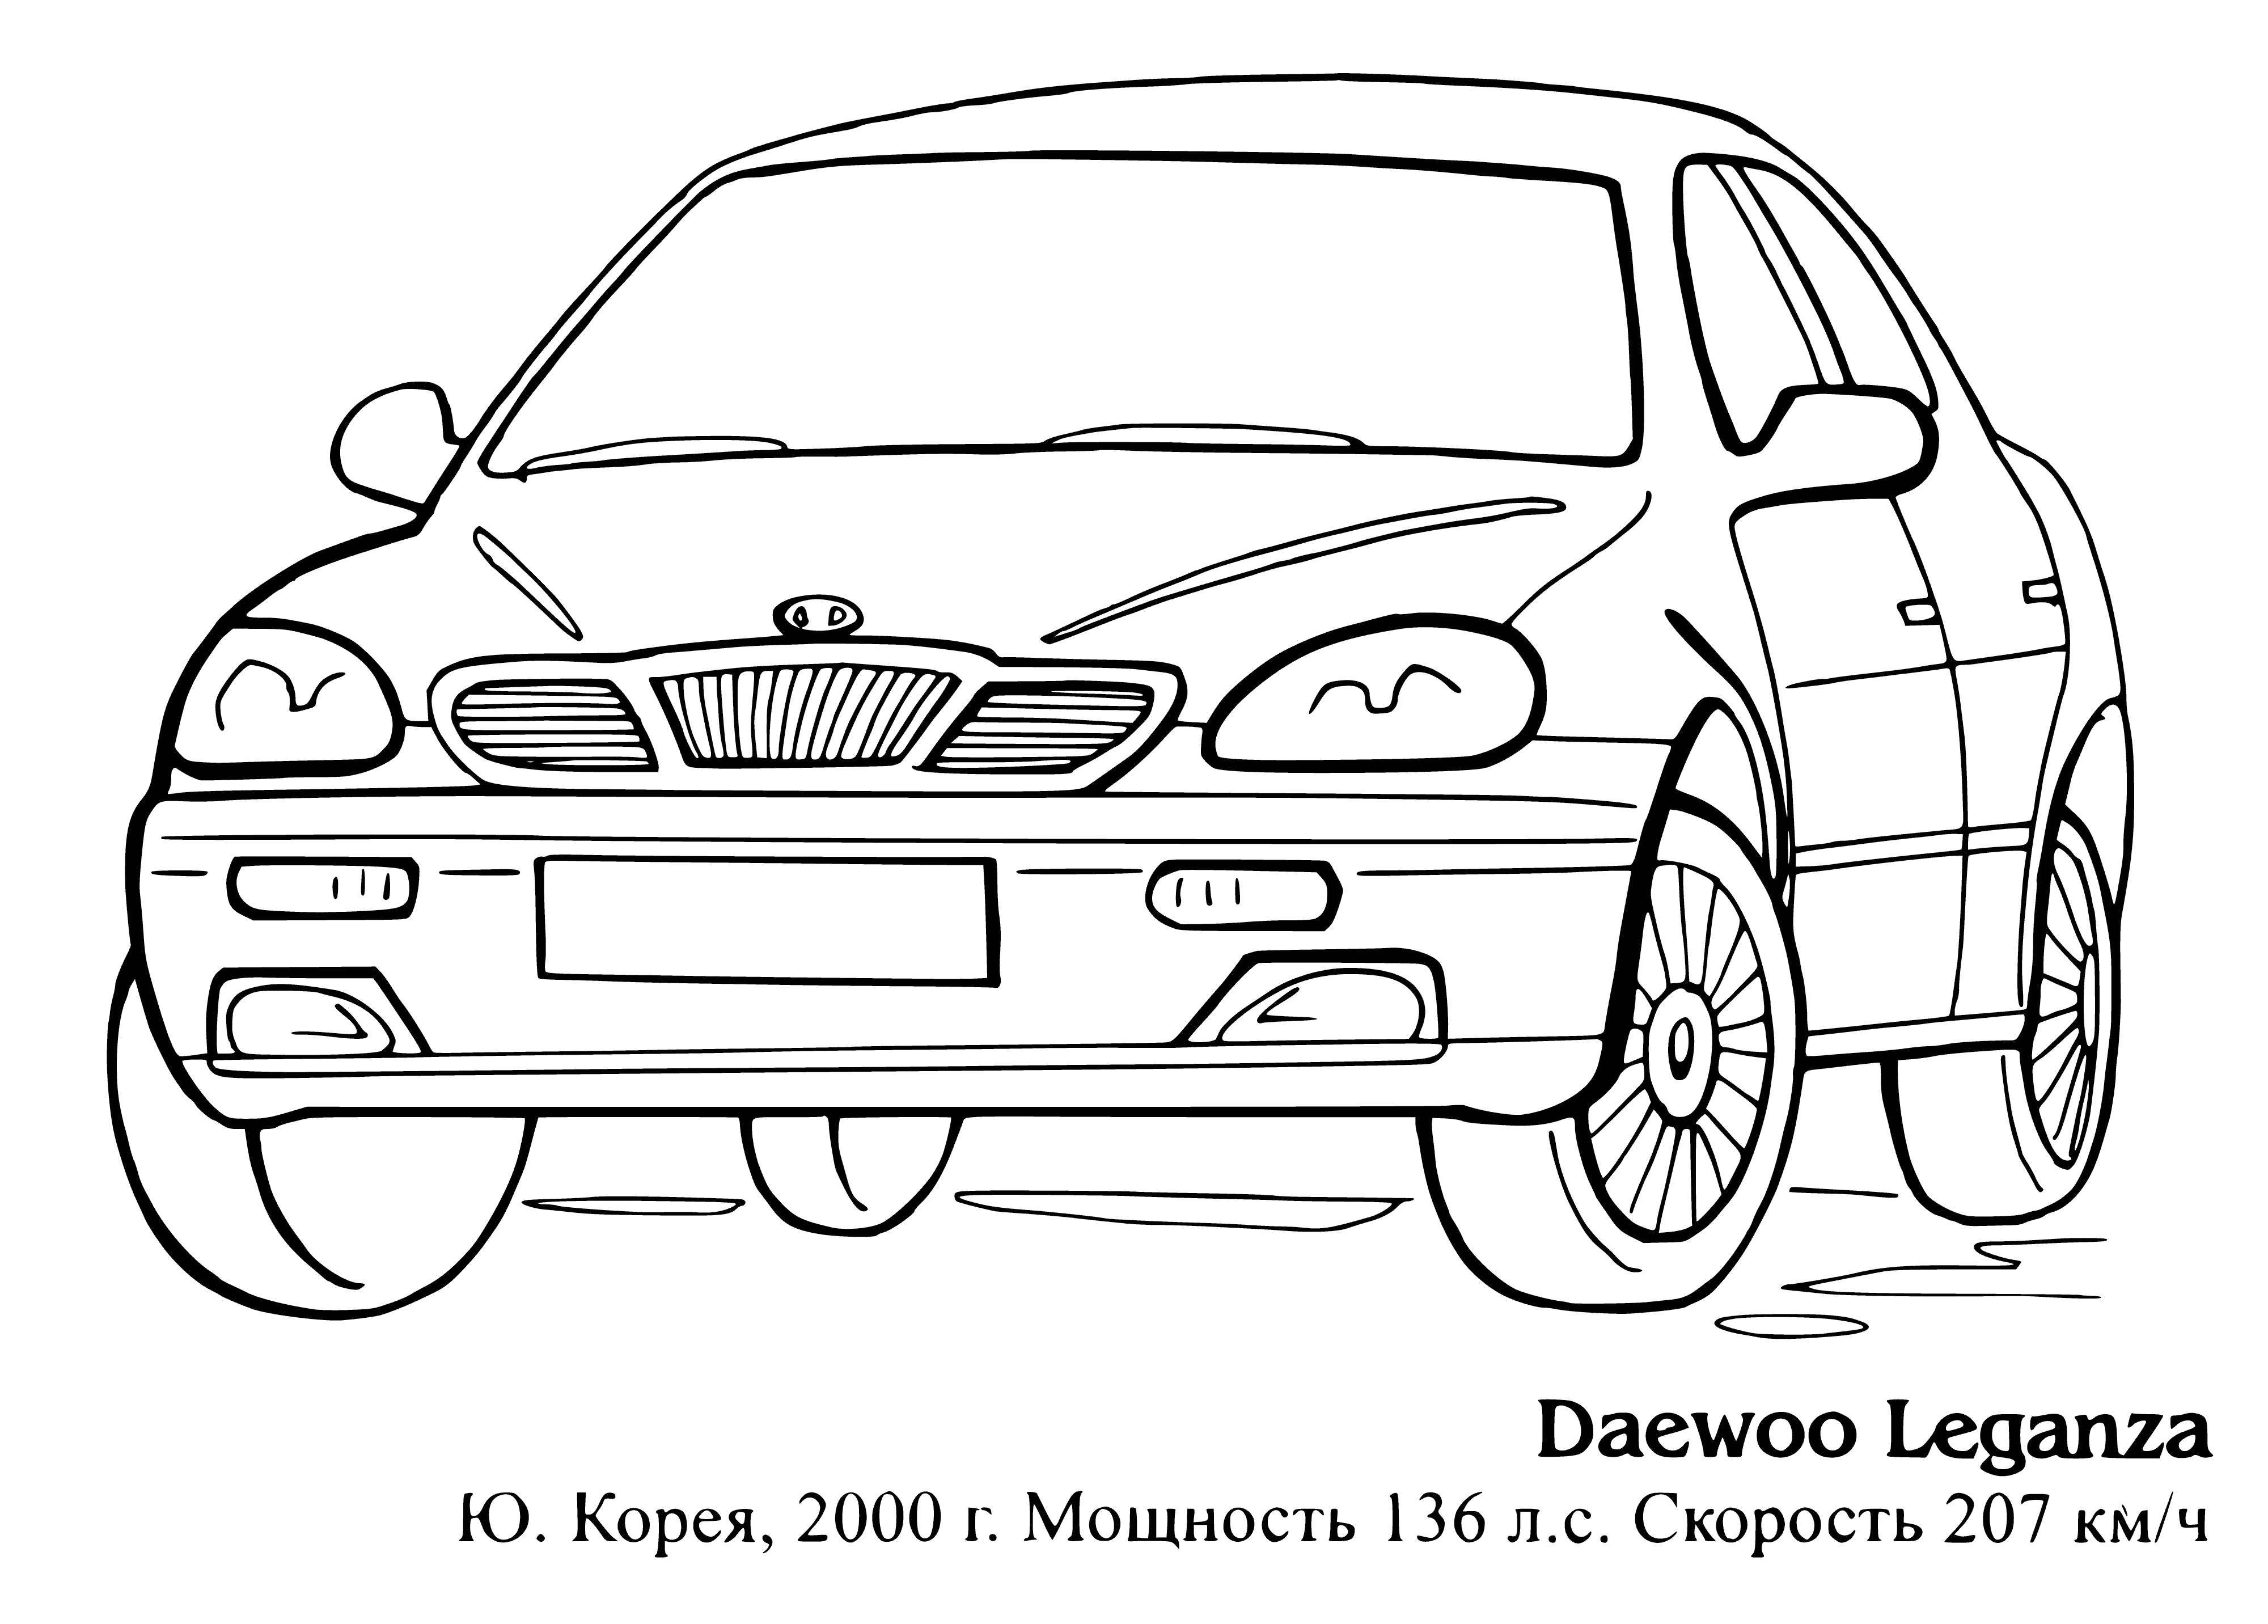 coloring page: Dark car w/ chrome accents, sleek lines, four doors, large wheels, spoiler.